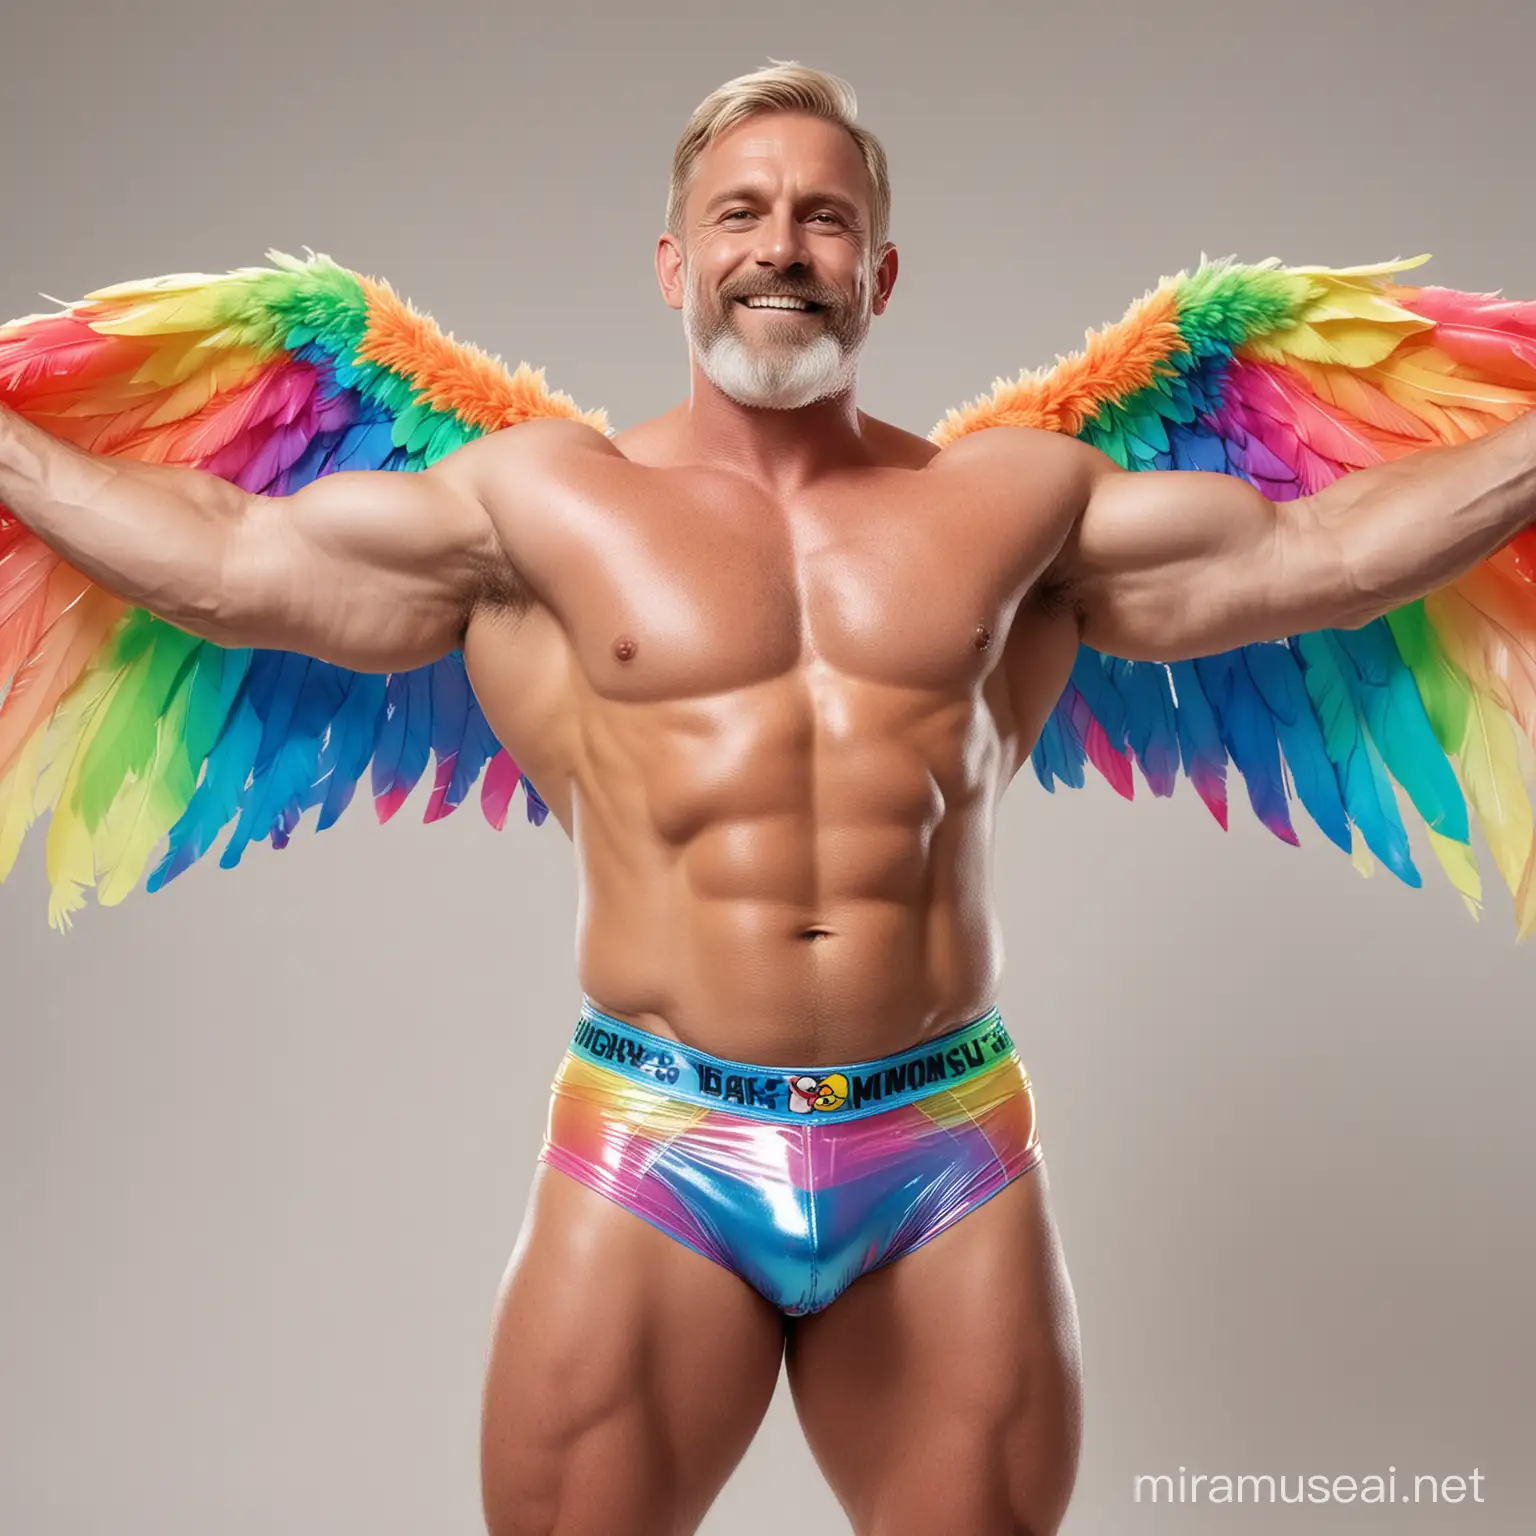 Topless 30s Thick Beefy Blond IFBB Bodybuilder Beard Daddy wearing Multi-Highlighter Bright Rainbow Coloured See Through Jacket with Eagle wings and Flexing Big Strong Arm with doraemon